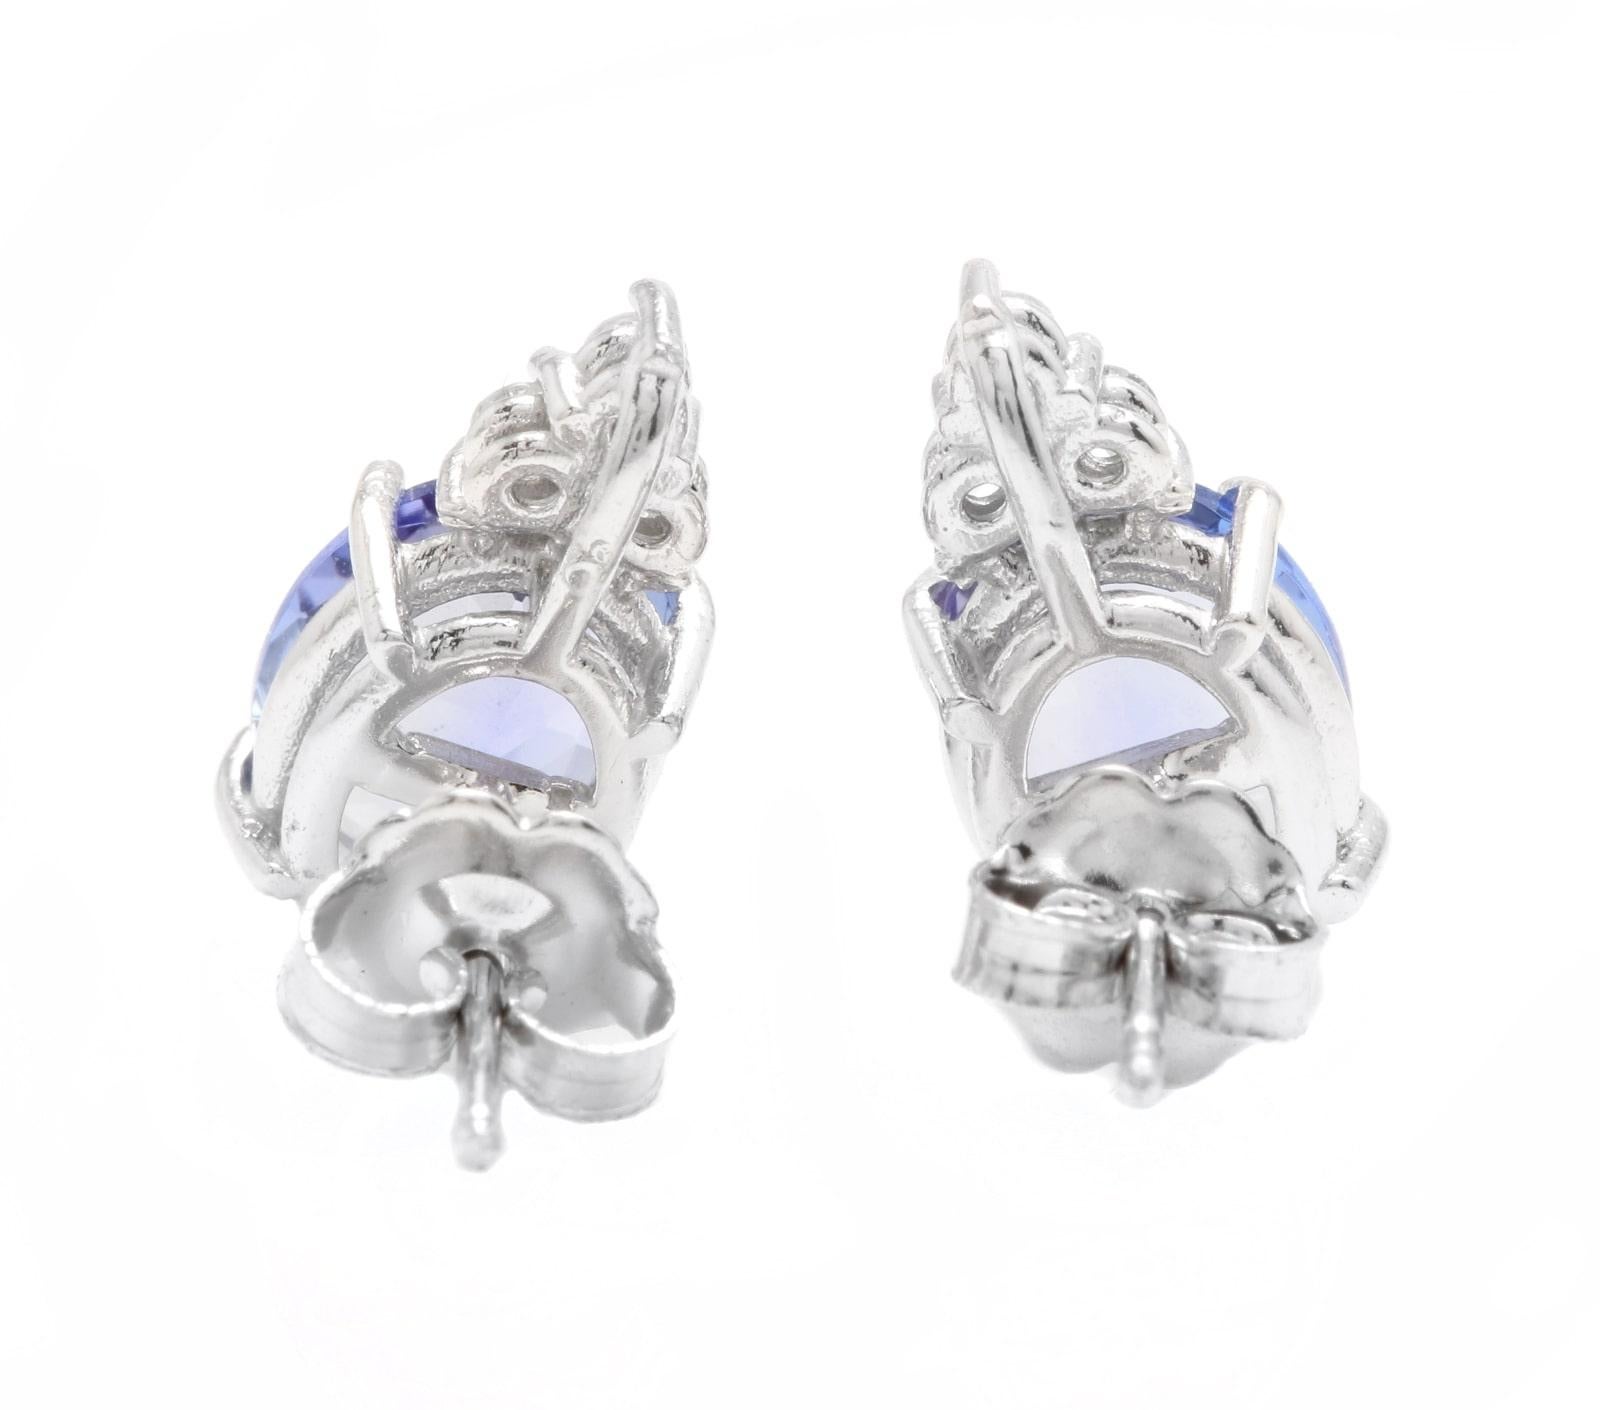 4.20 Carats Natural Tanzanite and Diamond 14K Solid White Gold Stud Earrings

Amazing looking piece! 

Suggested Replacement Value $4,000.00

Total Natural Round Cut White Diamonds Weight: Approx. 0.20 Carat (color G-H / Clarity SI1SI2)

Total